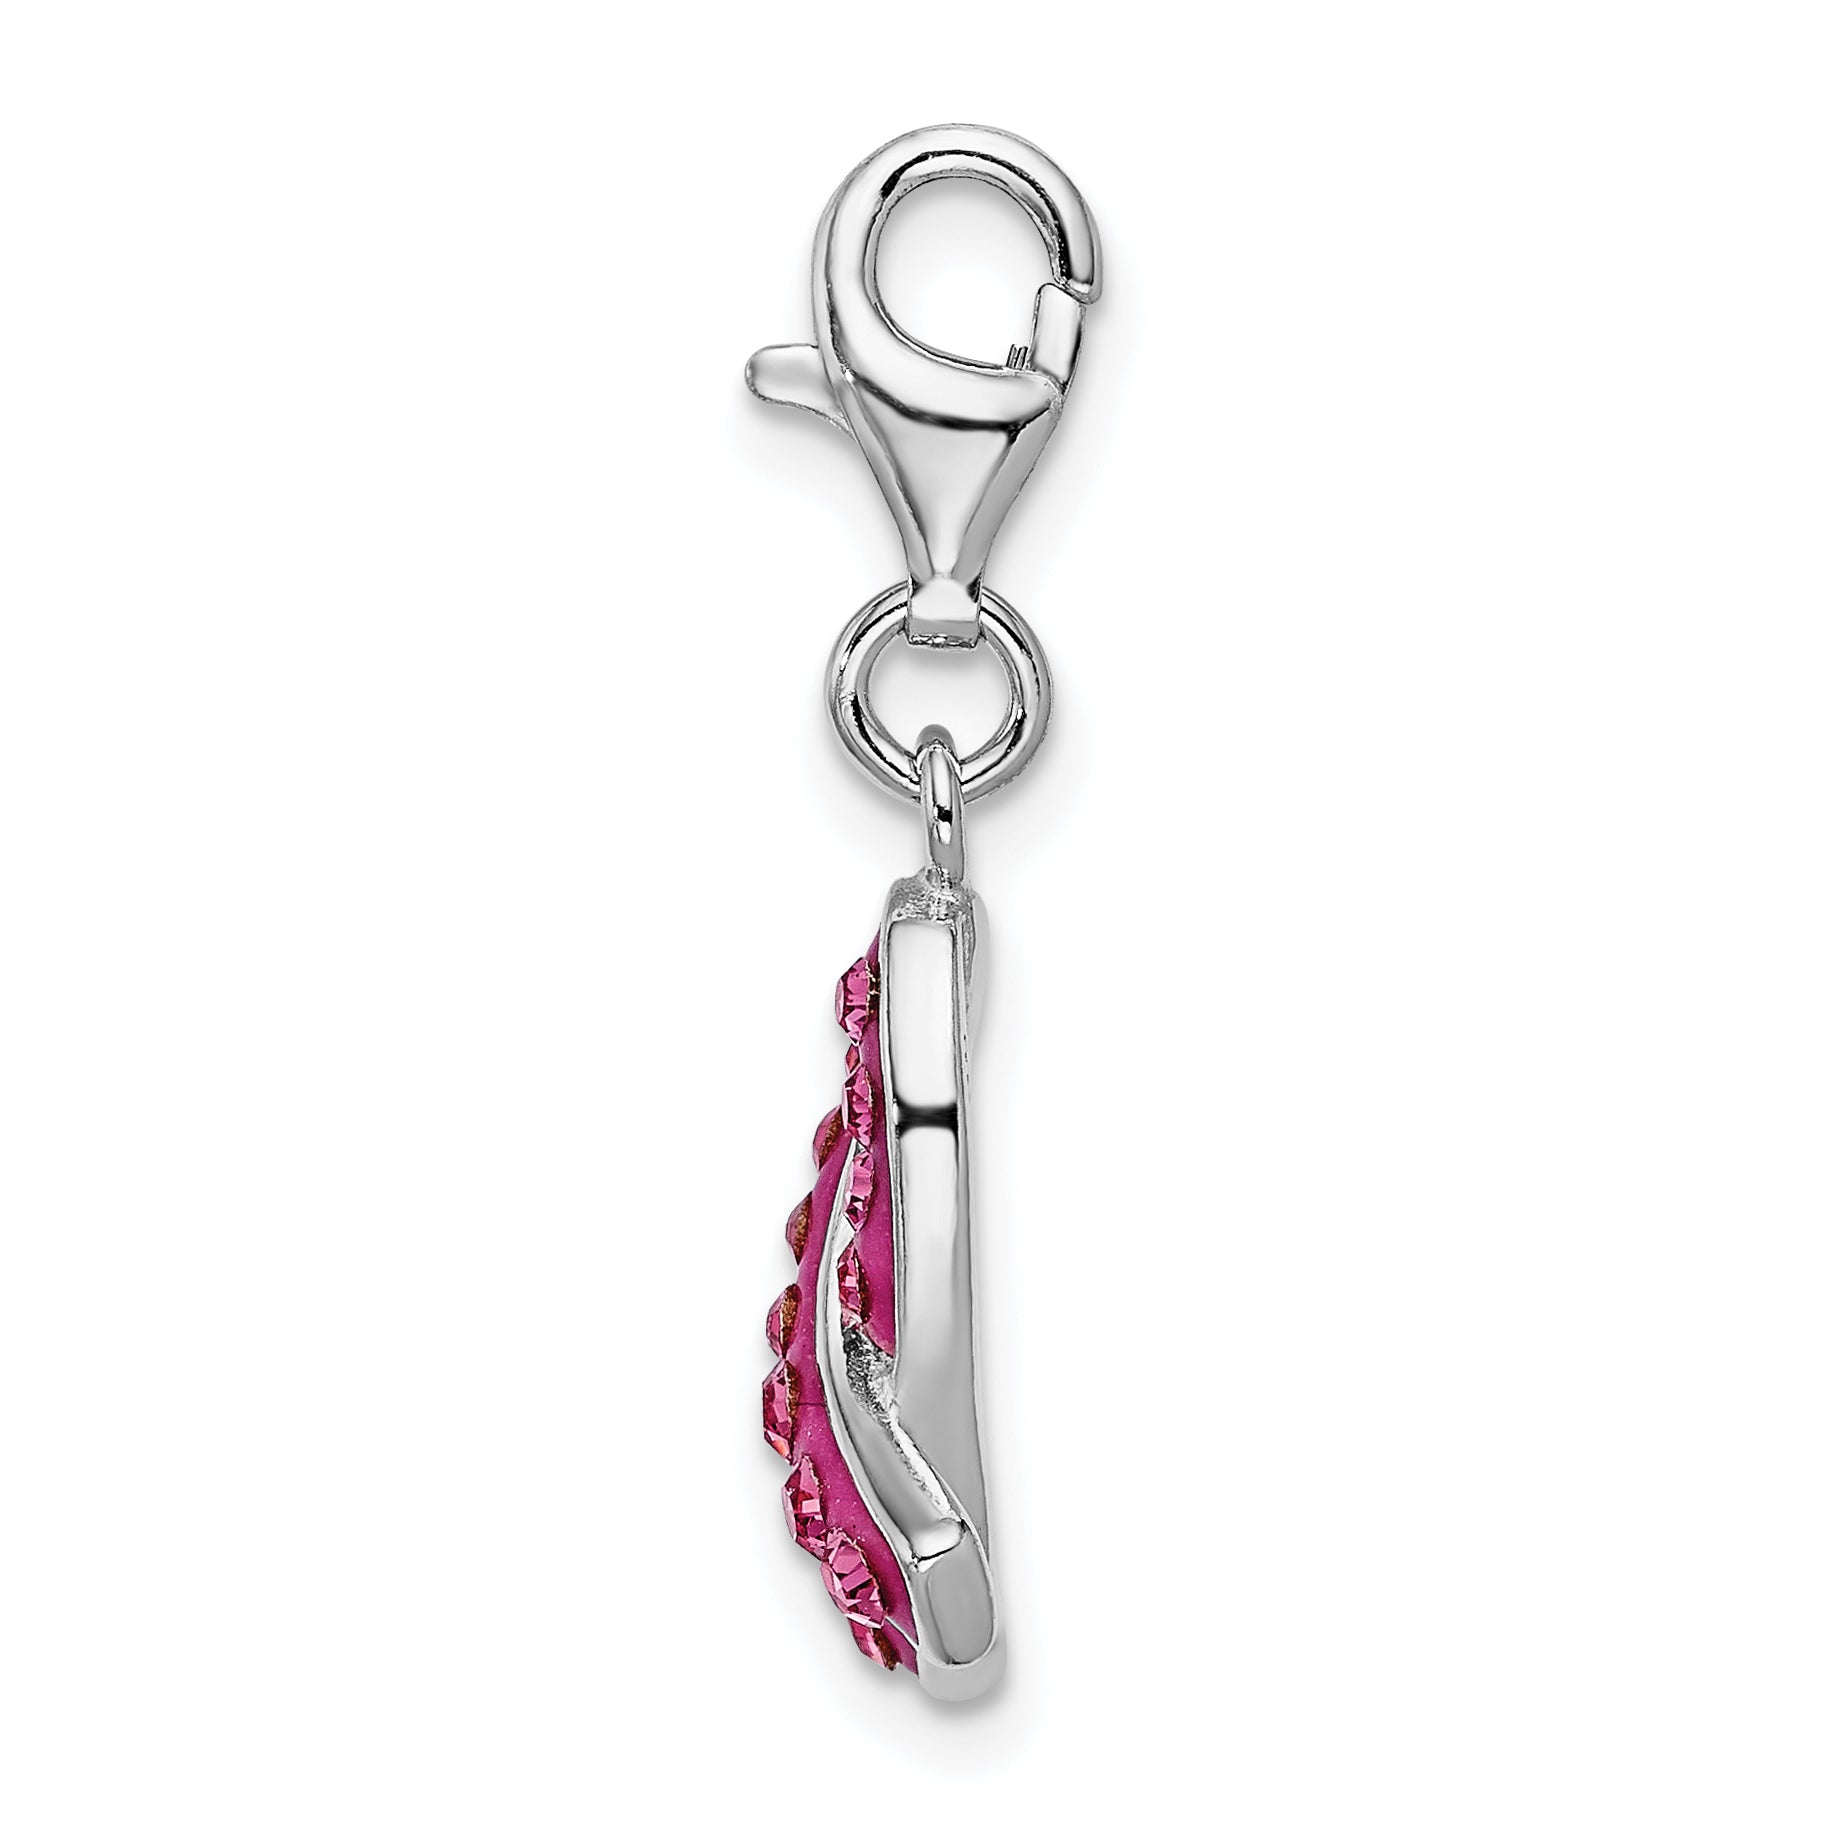 Amore La Vita Sterling Silver Rhodium-plated Polished Stellux Crystal Pink Awareness Charm with Fancy Lobster Clasp